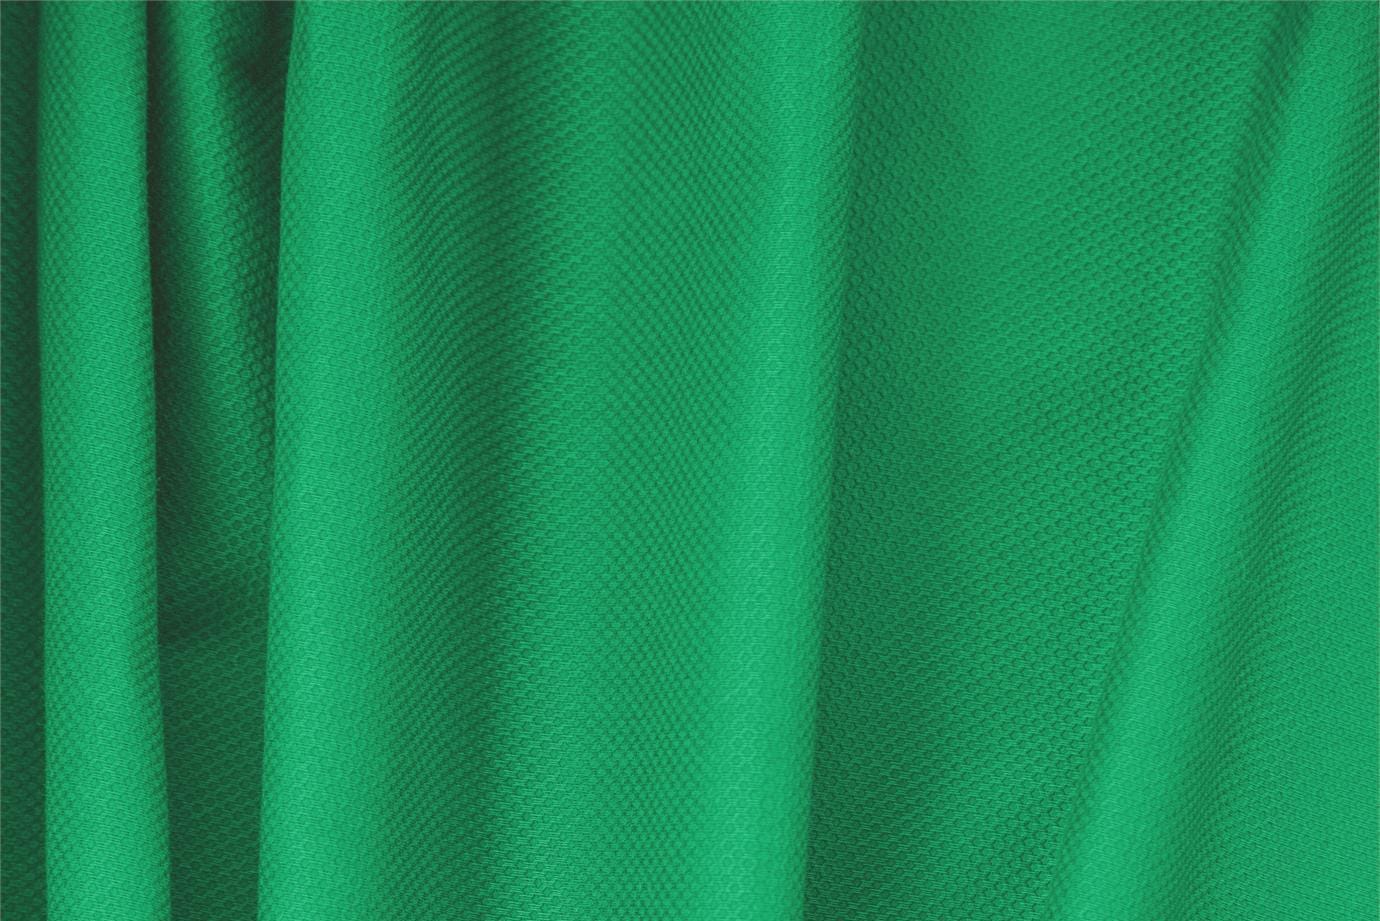 Green Green Cotton, Stretch Pique Stretch fabric for dressmaking